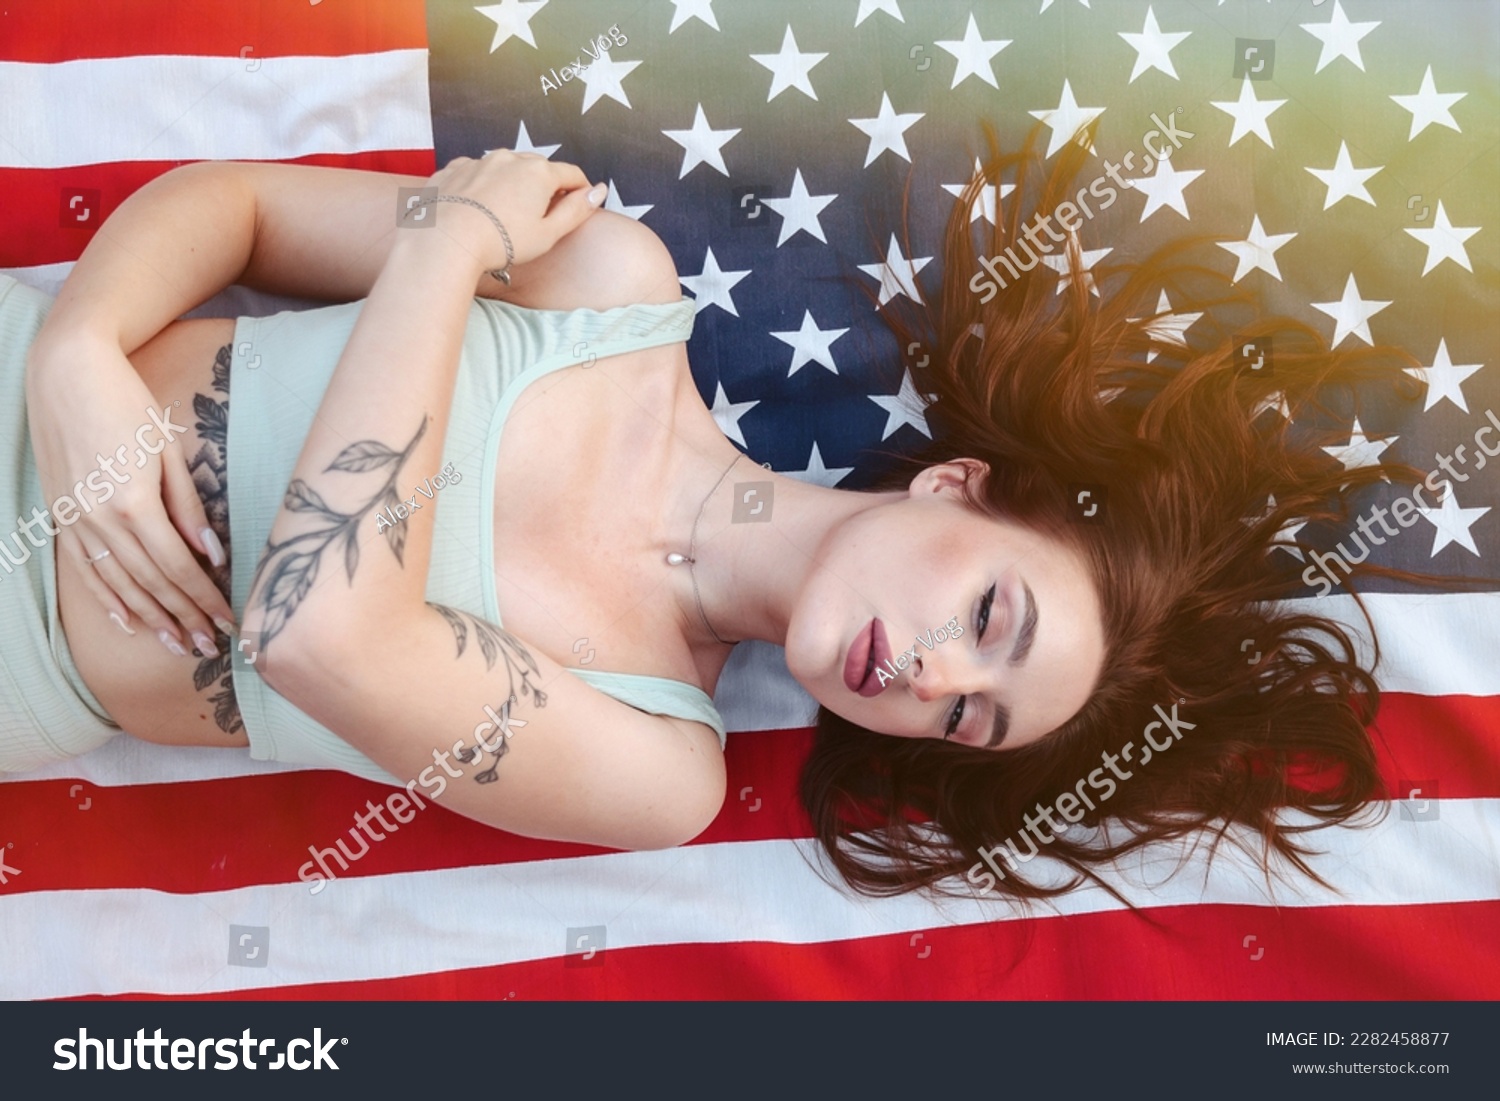 Top view of jewish pretty lady model lying down on american flag, dreaming, closed eyes. Young cute brunette woman with tattoo at flag of USA background. American dream concept. Copy ad text space #2282458877